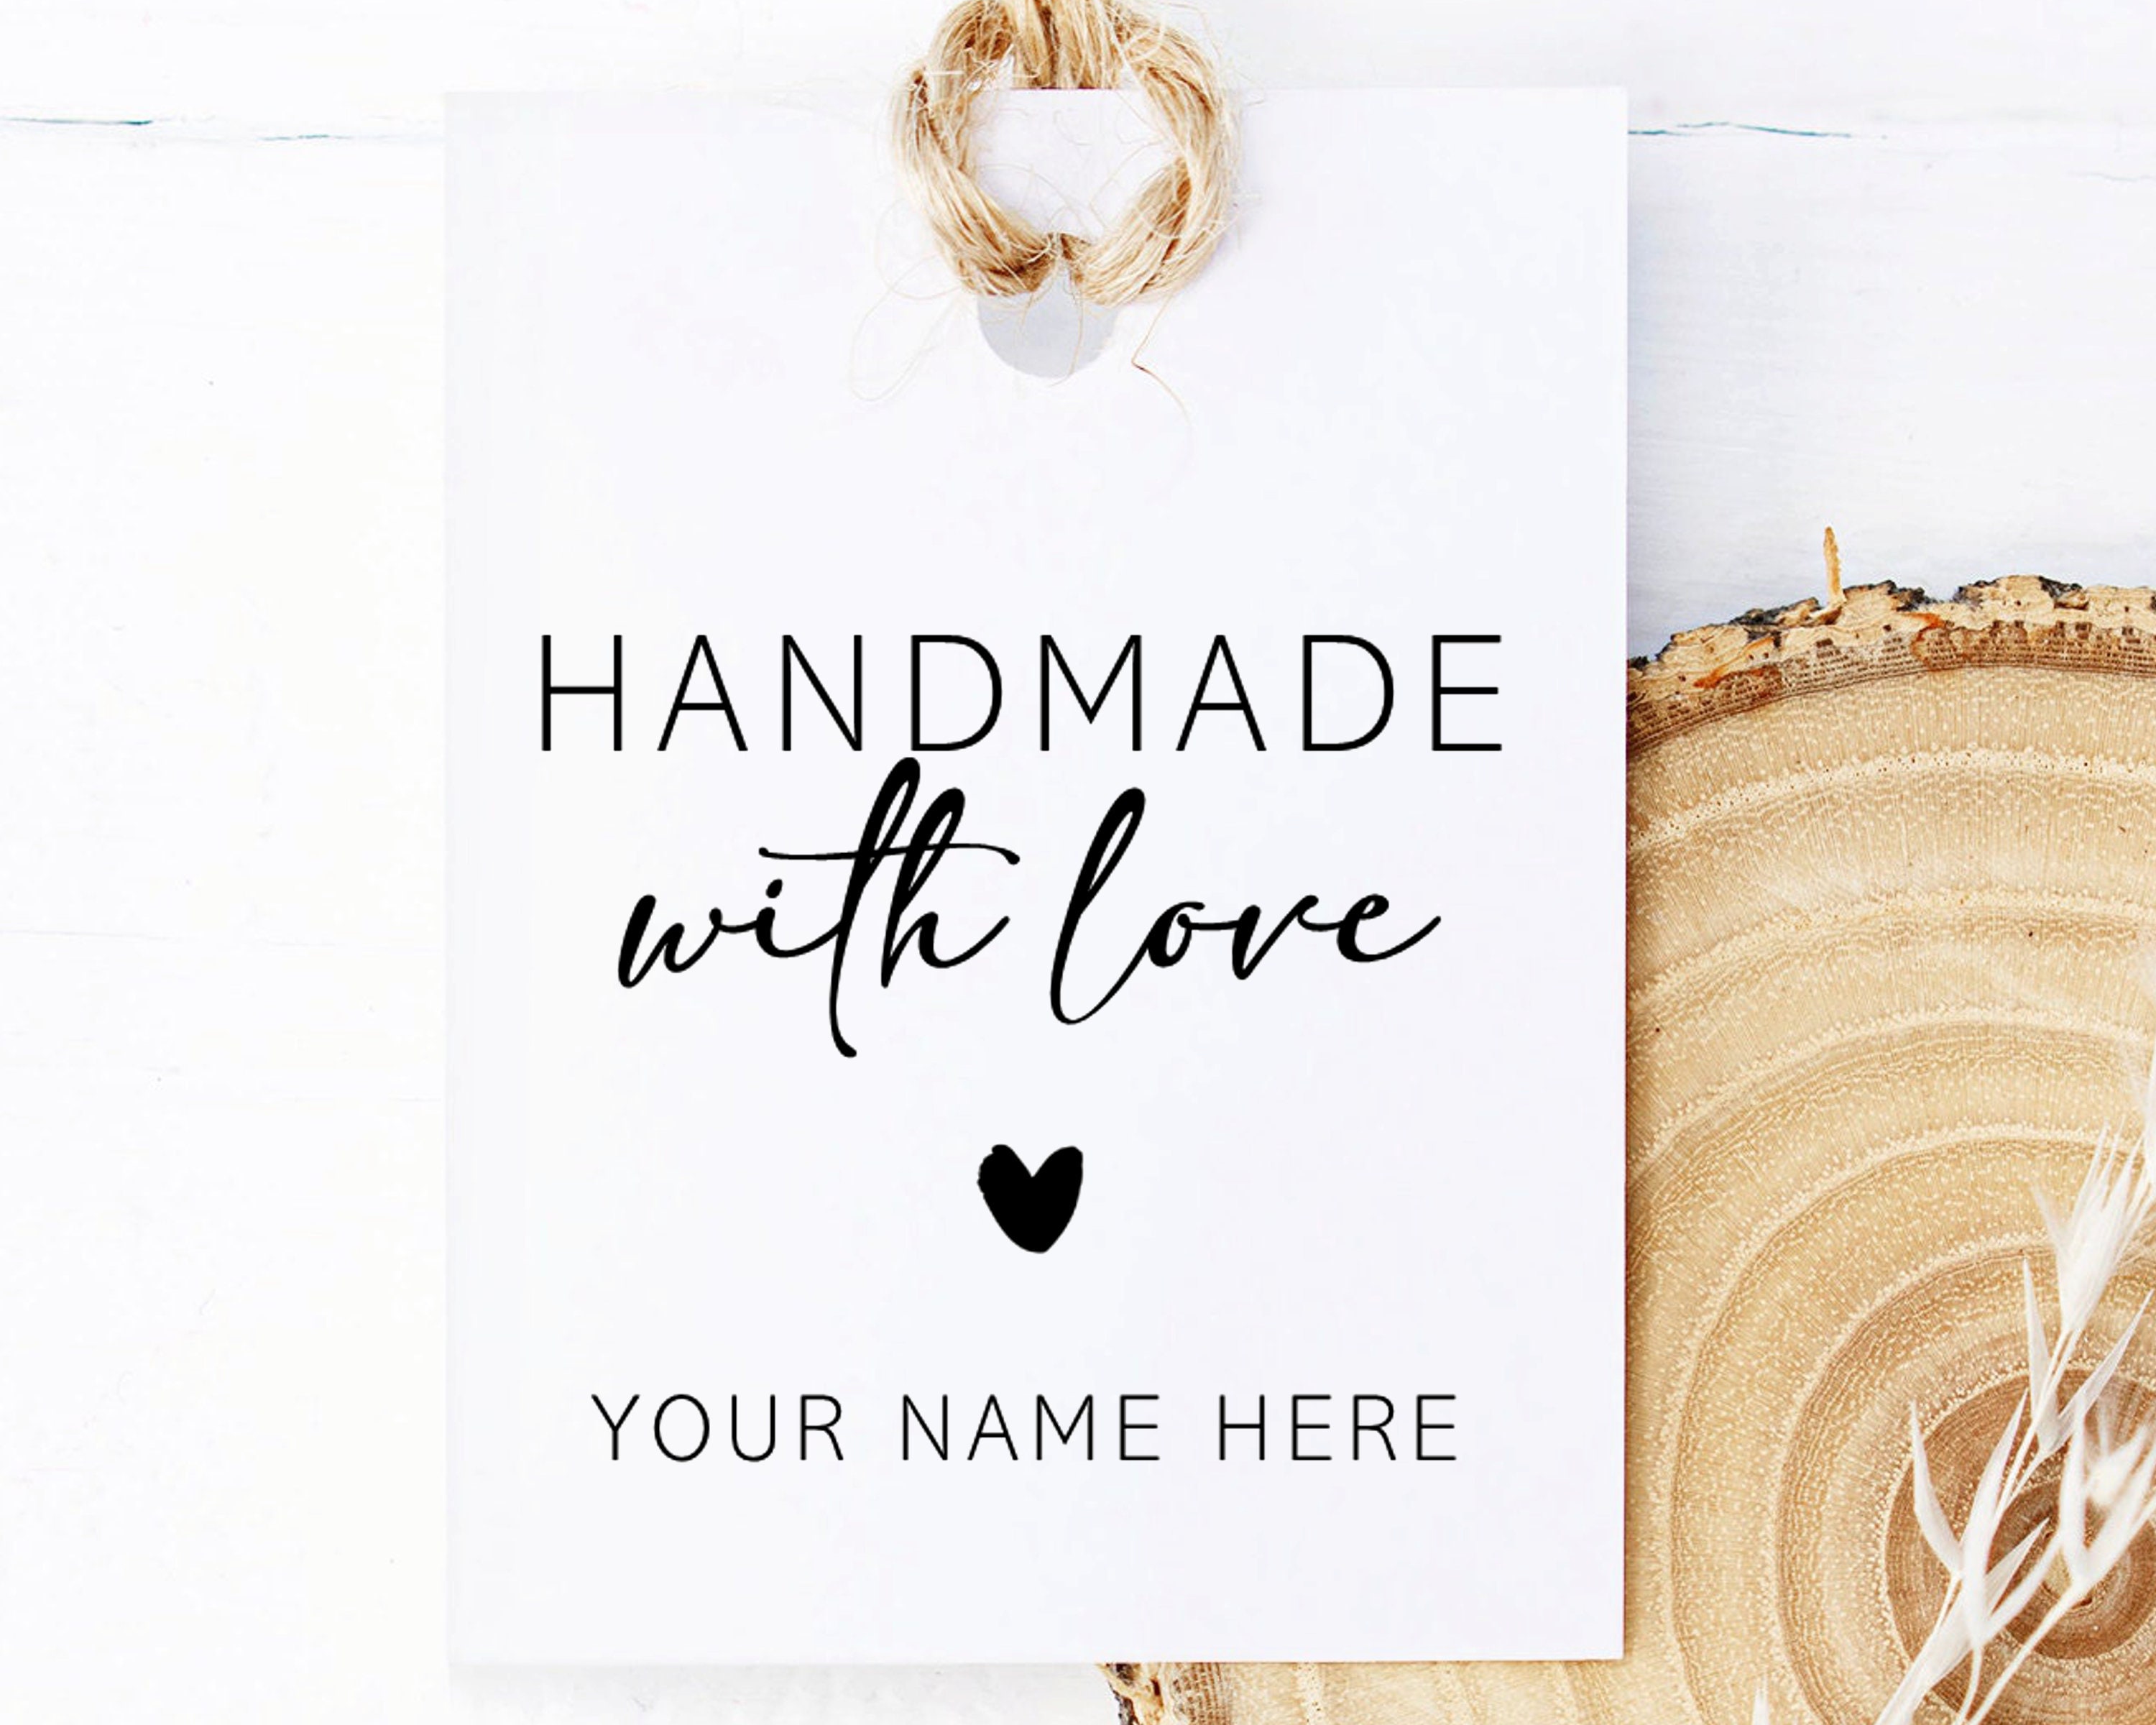 Handmade with love paper tags care Royalty Free Vector Image